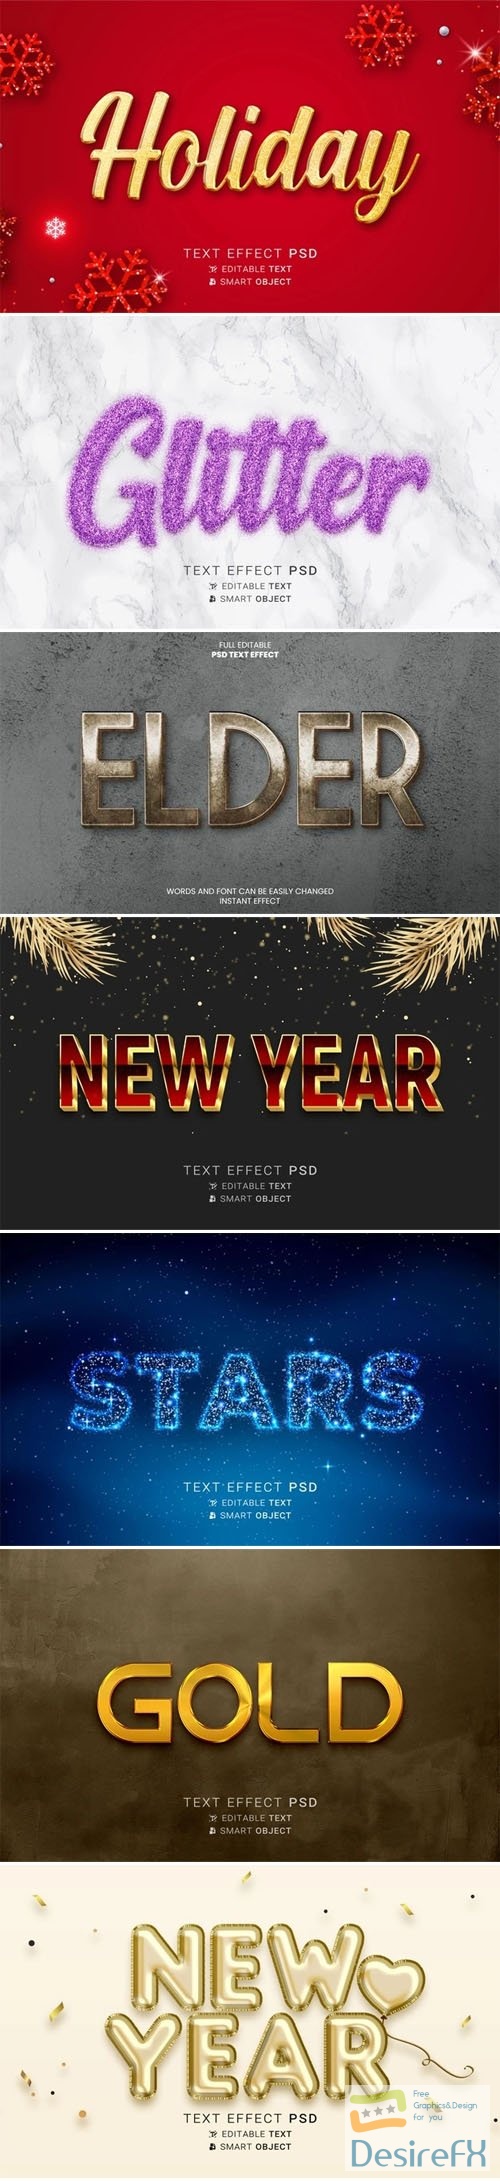 14 Modern Text Effects PSD Templates Collection